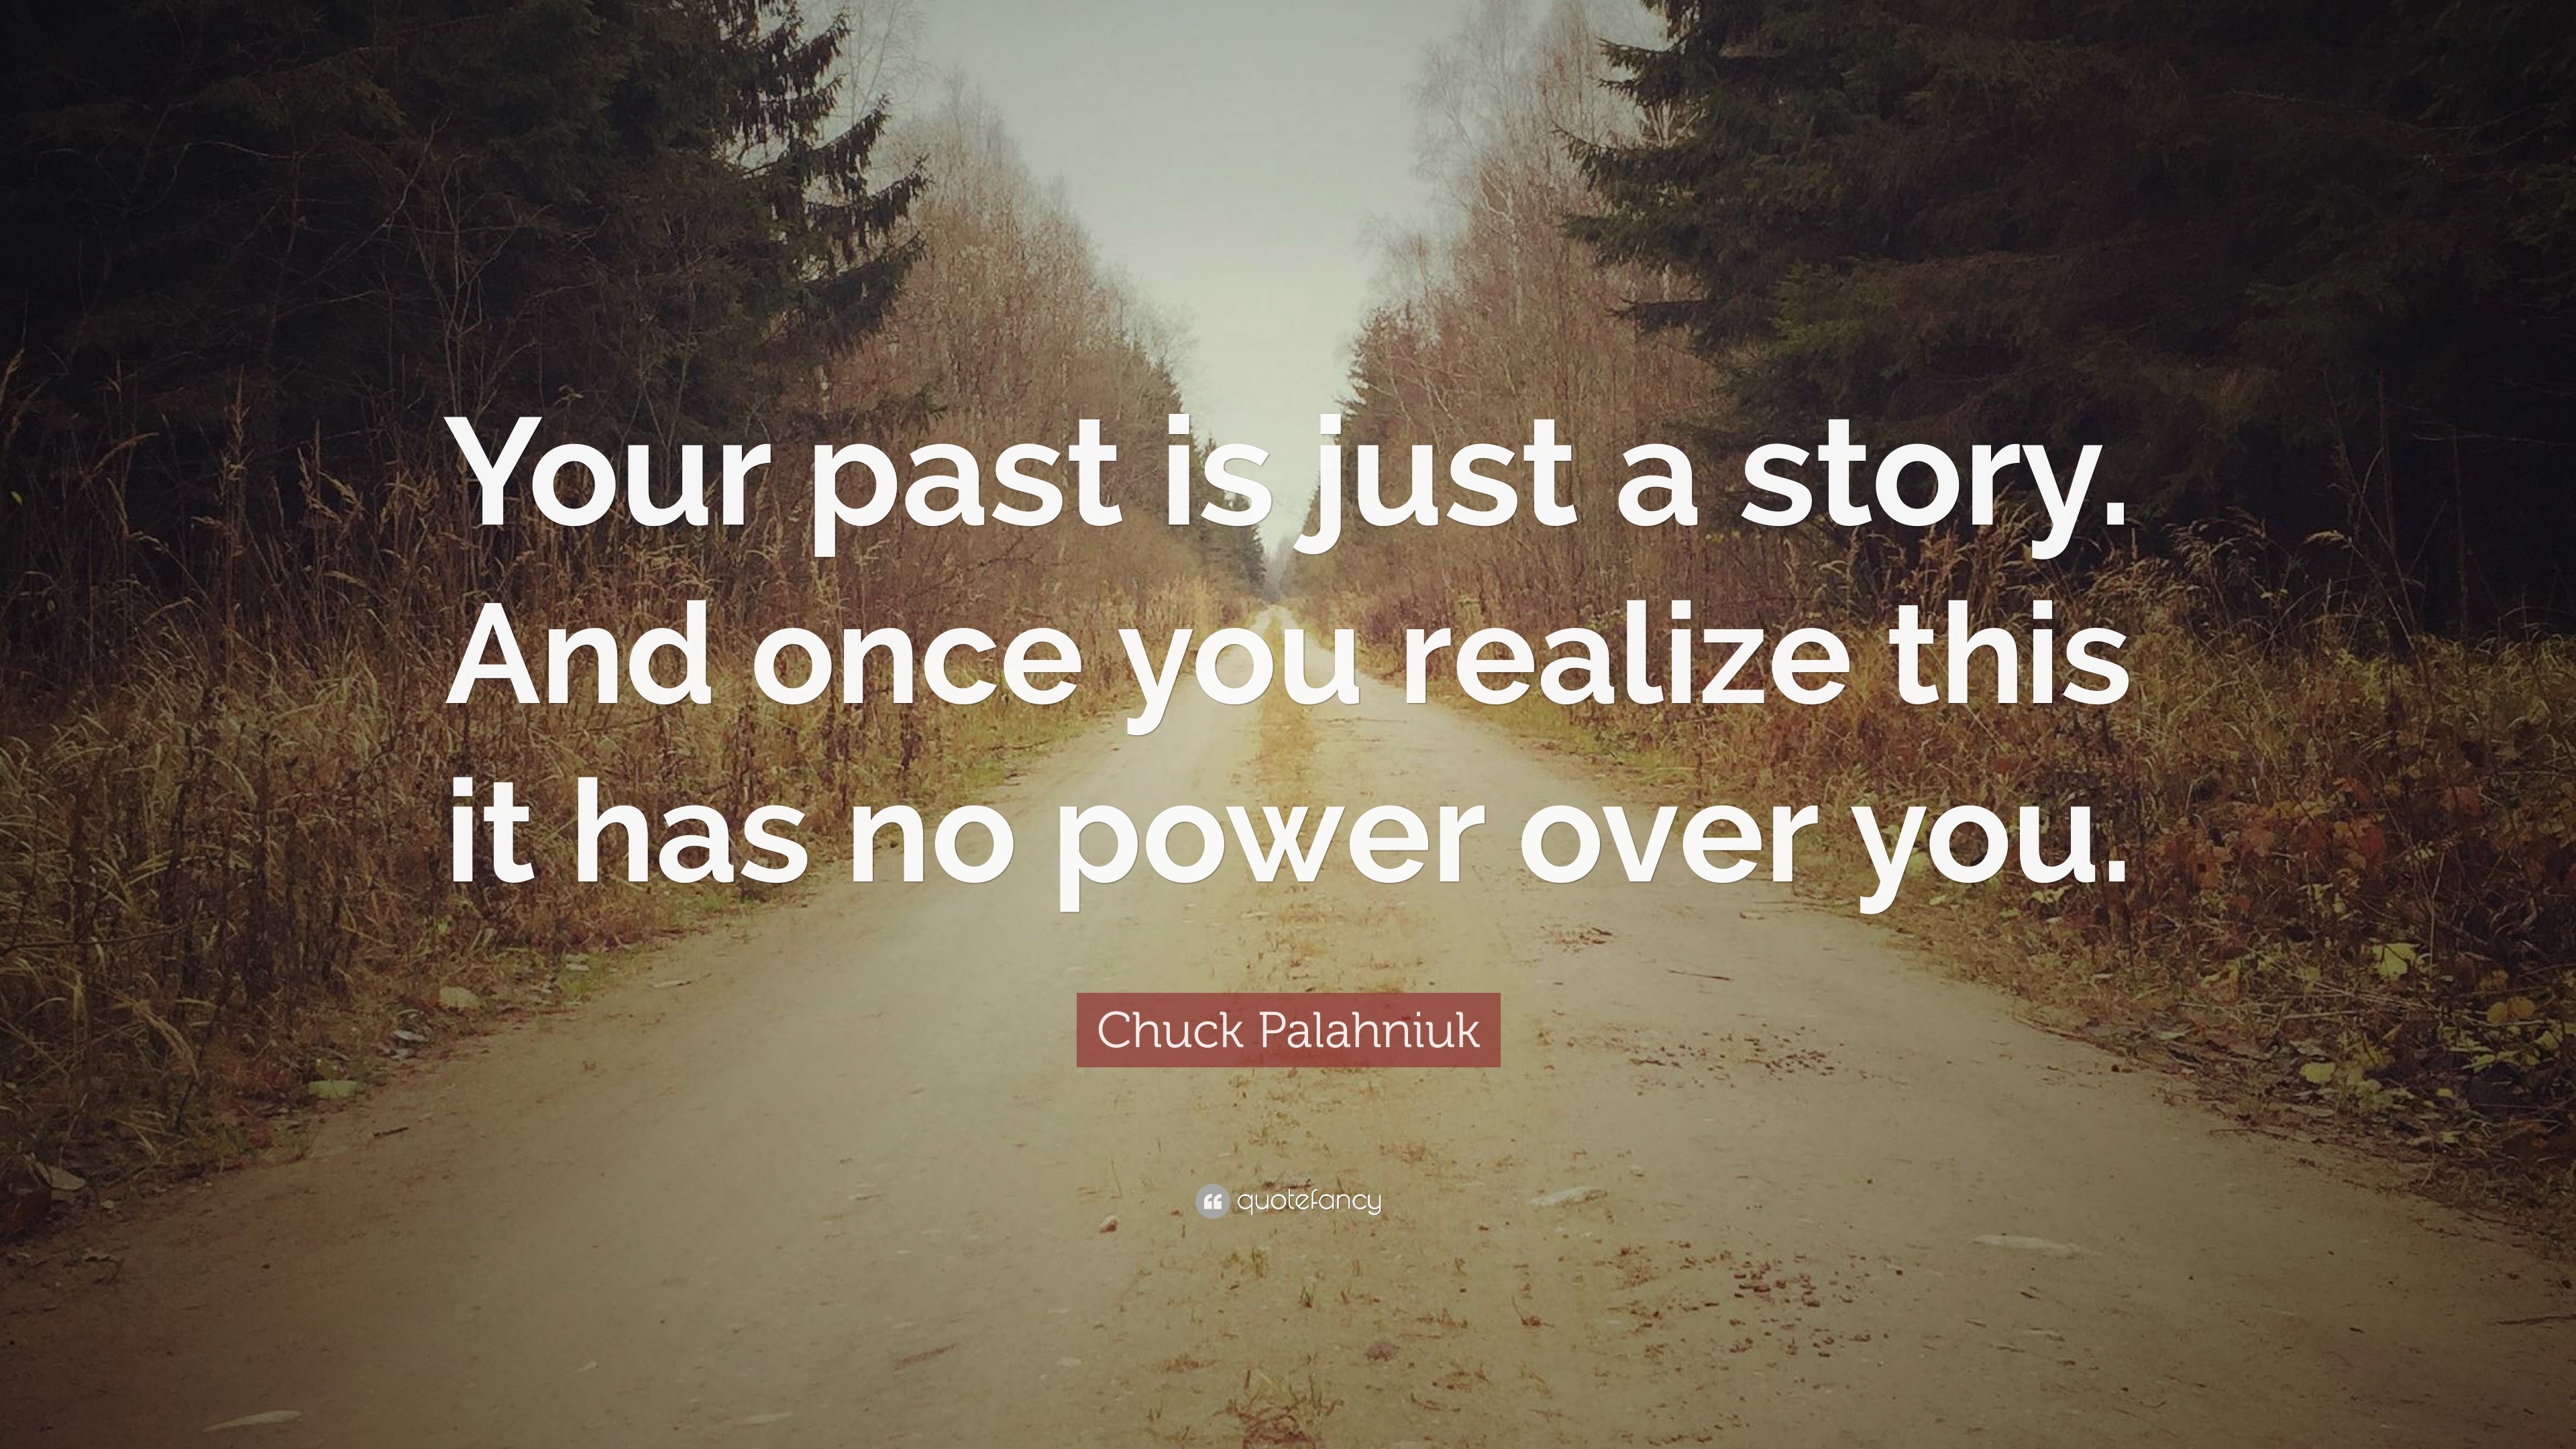 48 Cool and Inspiring Forget the past quotes and captions